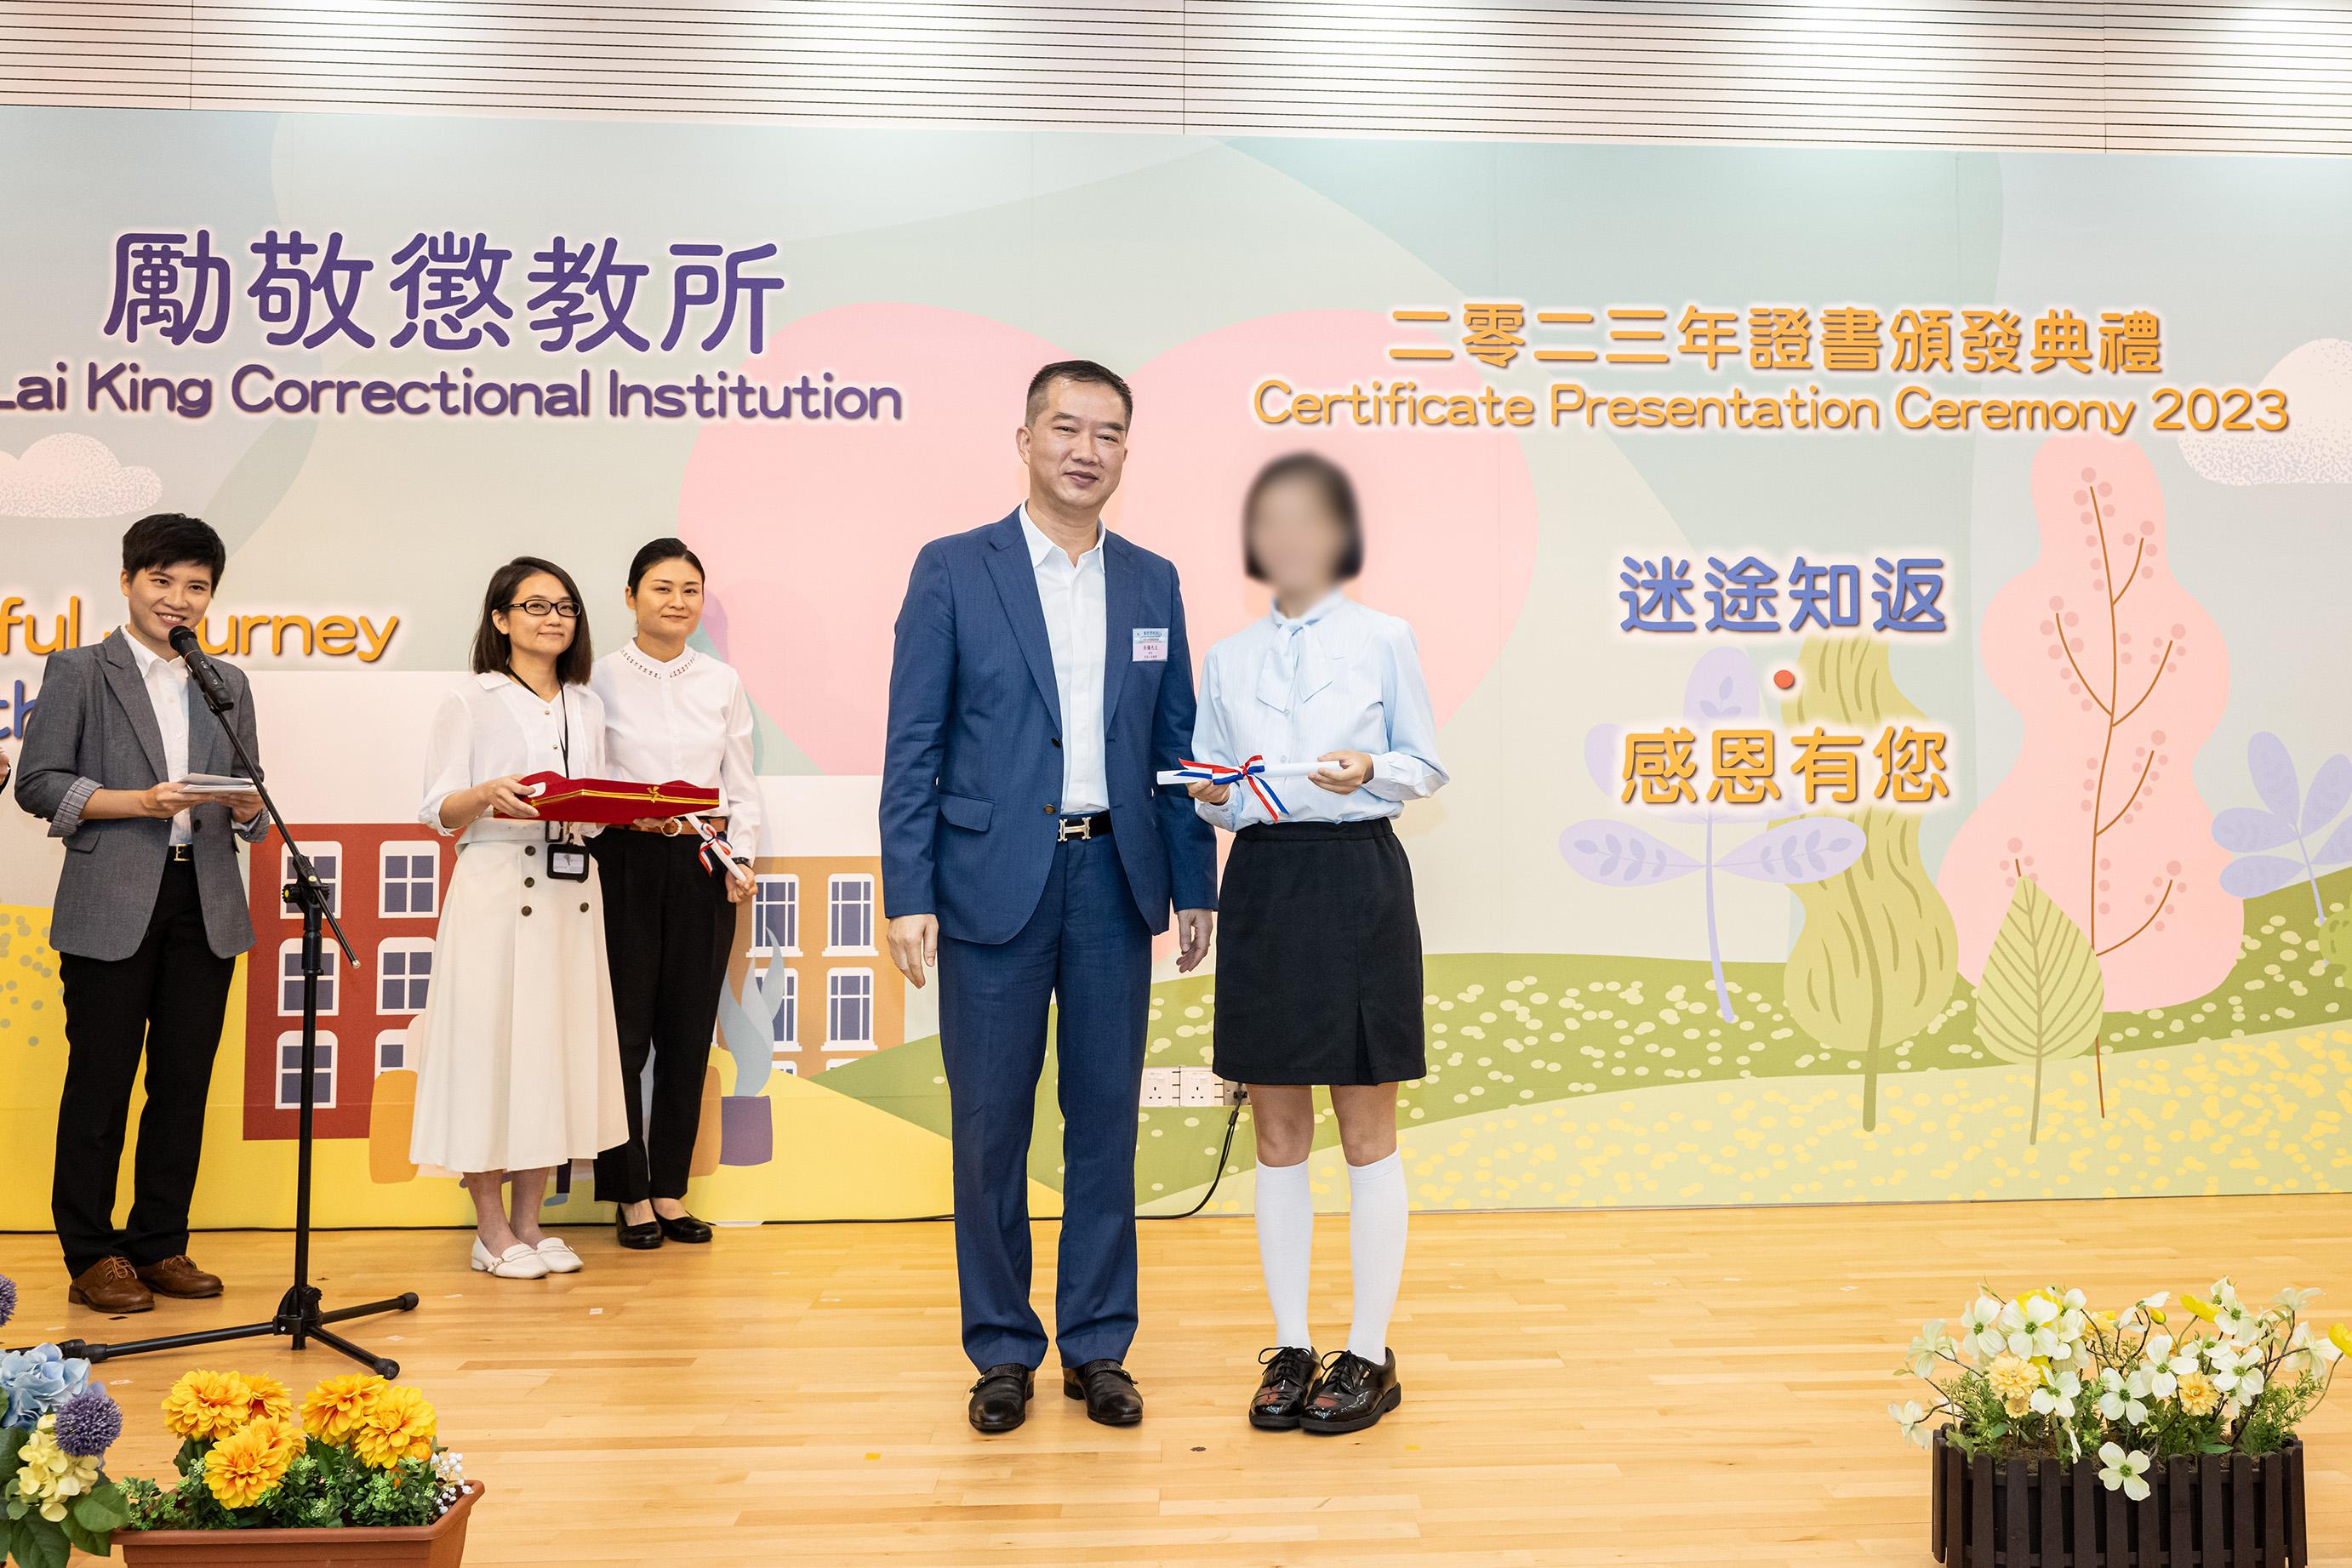 Young persons in custody at Lai King Correctional Institution of the Correctional Services Department were presented with certificates at a ceremony today (September 20) in recognition of their efforts and achievements in studies and vocational examinations. Photo shows the Chairman of the Hong Kong Shanxi Chamber of Commerce, Mr Ng Tang (left), presenting a certificate to a young person in custody.